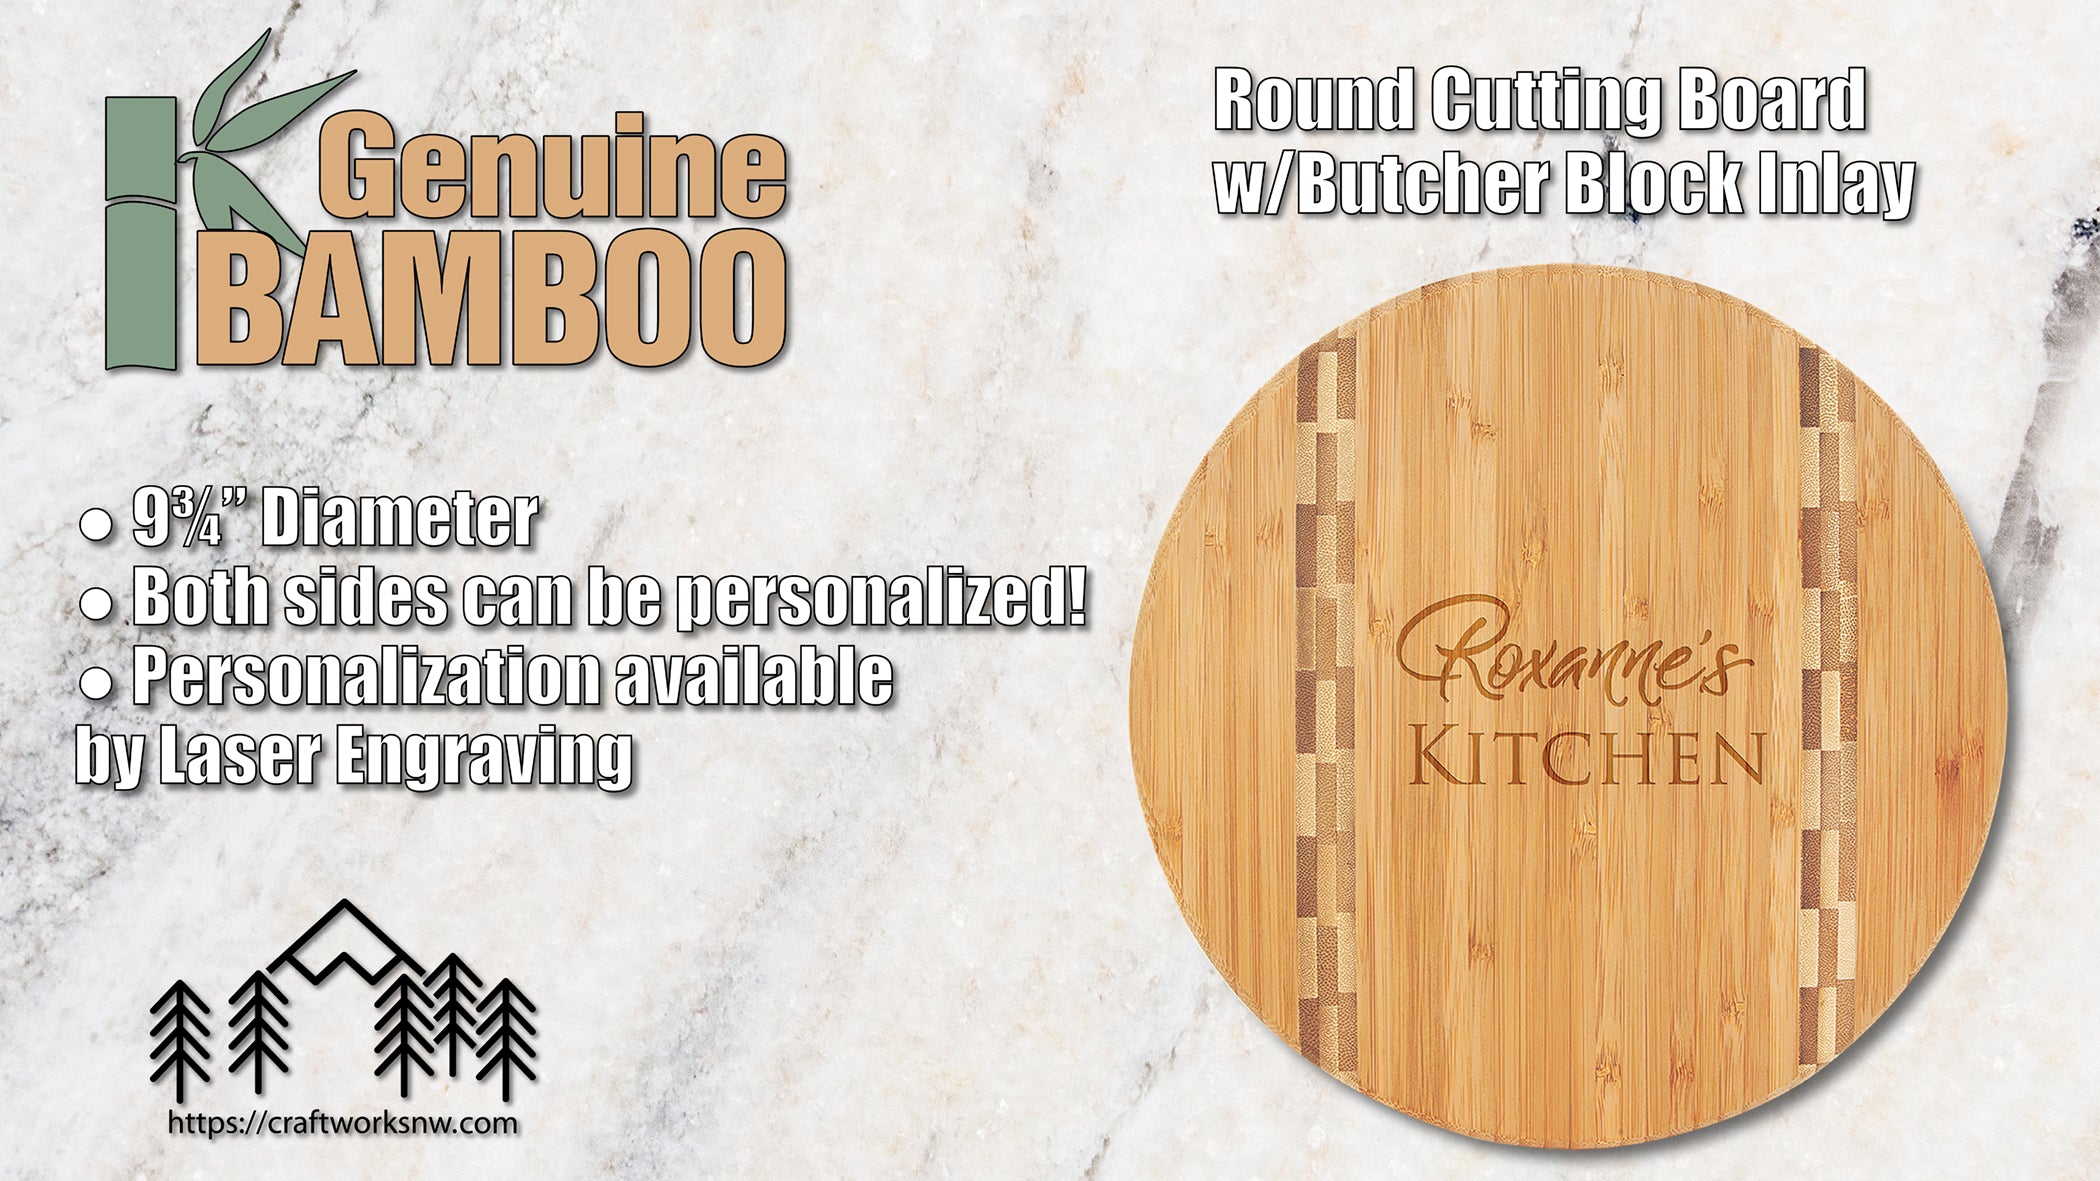 Round Cutting Board w/Butcher Block Inlay, Bamboo, 9 3/4", Laser Engraved - Craftworks NW, LLC